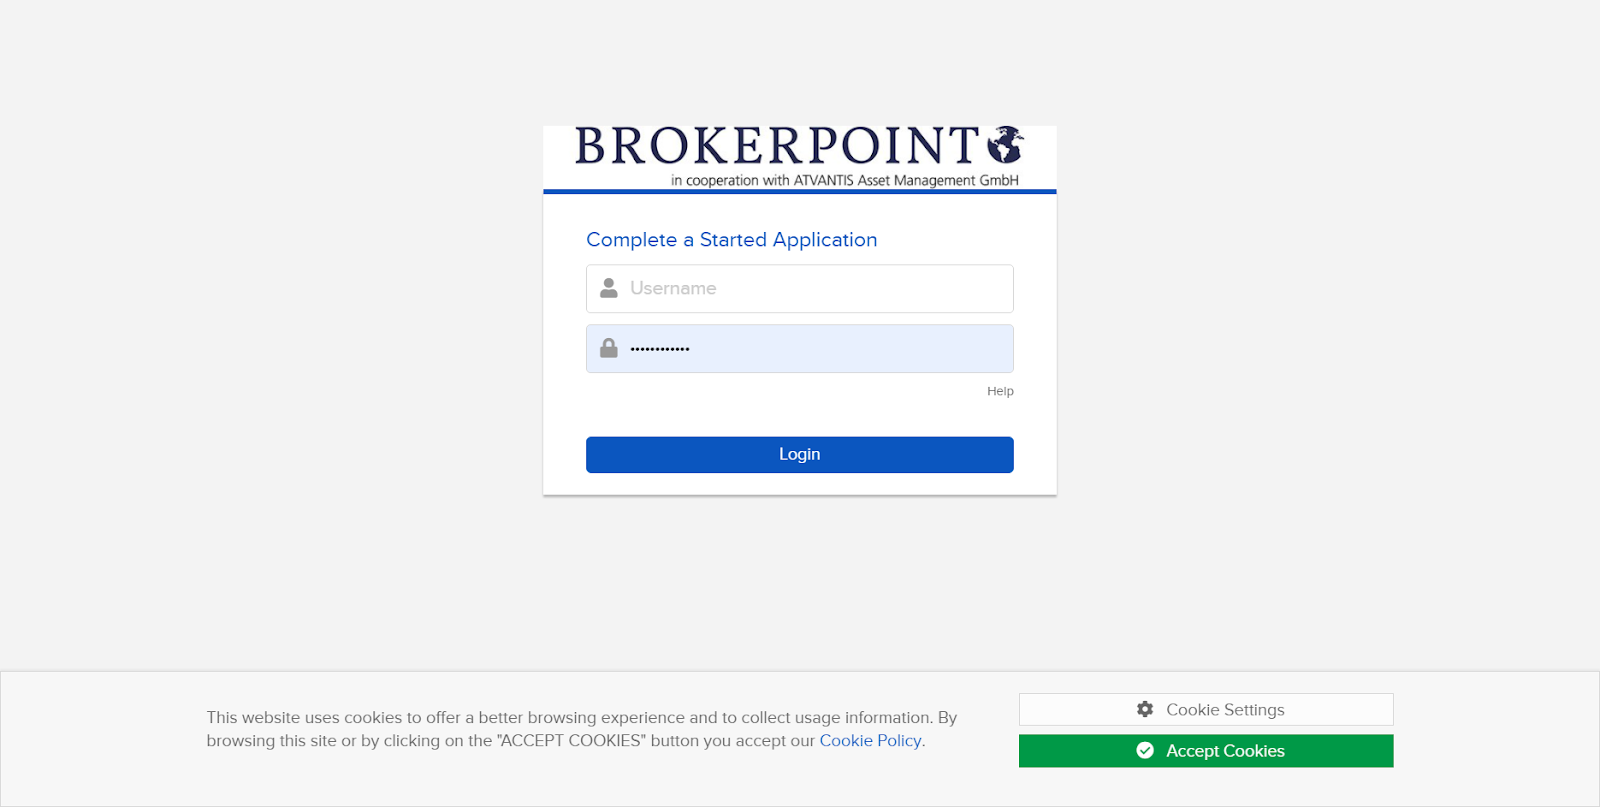 Brokerpoint’s Review  - Authorization